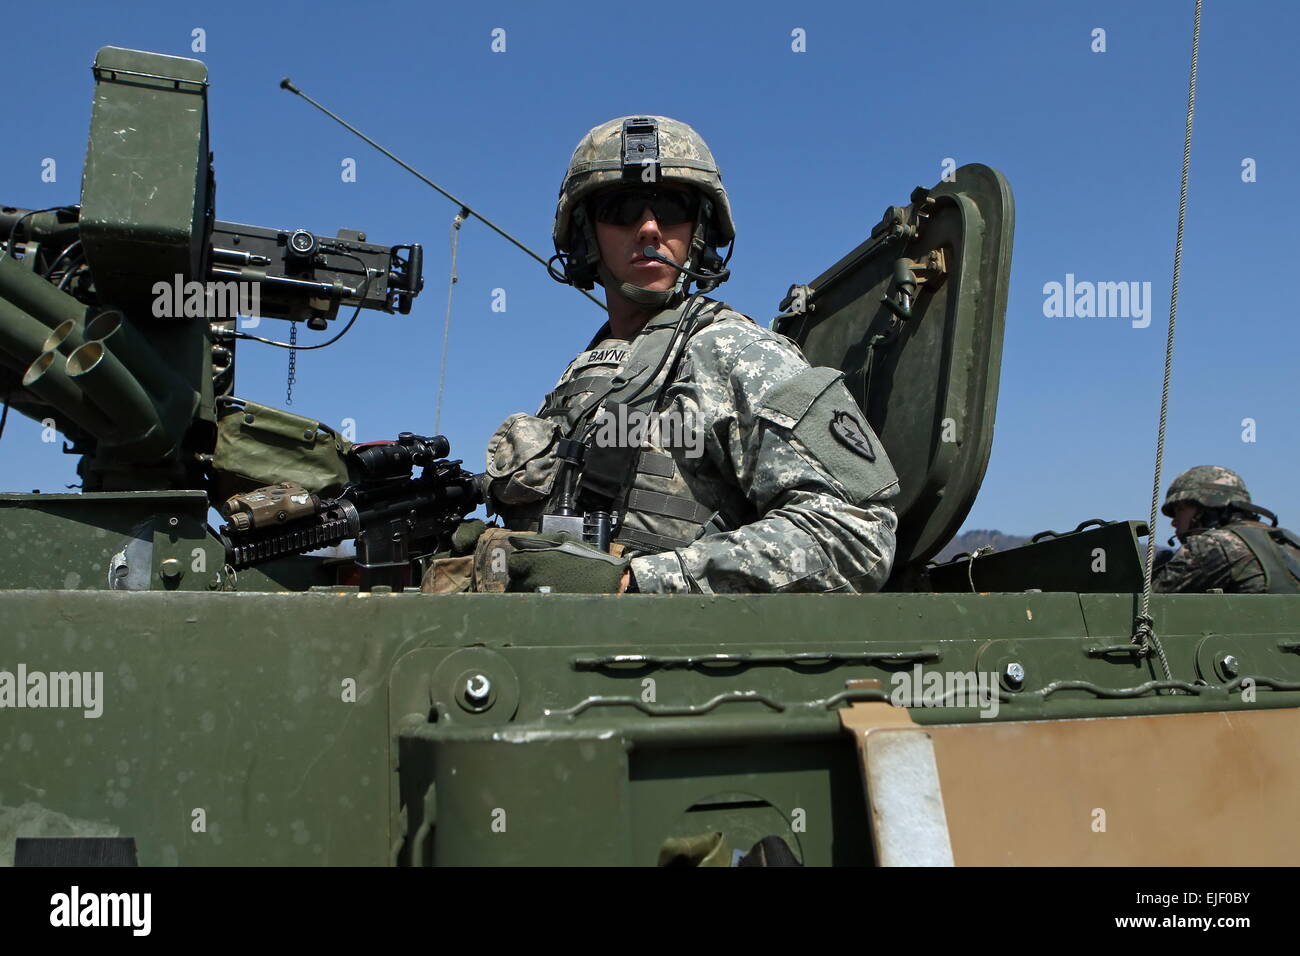 (150325) -- POCHEON, March 25, 2015 (Xinhua) -- An U.S. army soldier sits on top of an armored vehicle during the annual joint military exercise Foal Eagle between South Korea and the United States in Pocheon, northeast of Seoul, March 25, 2015. (Xinhua/Seongbin Kang) Stock Photo